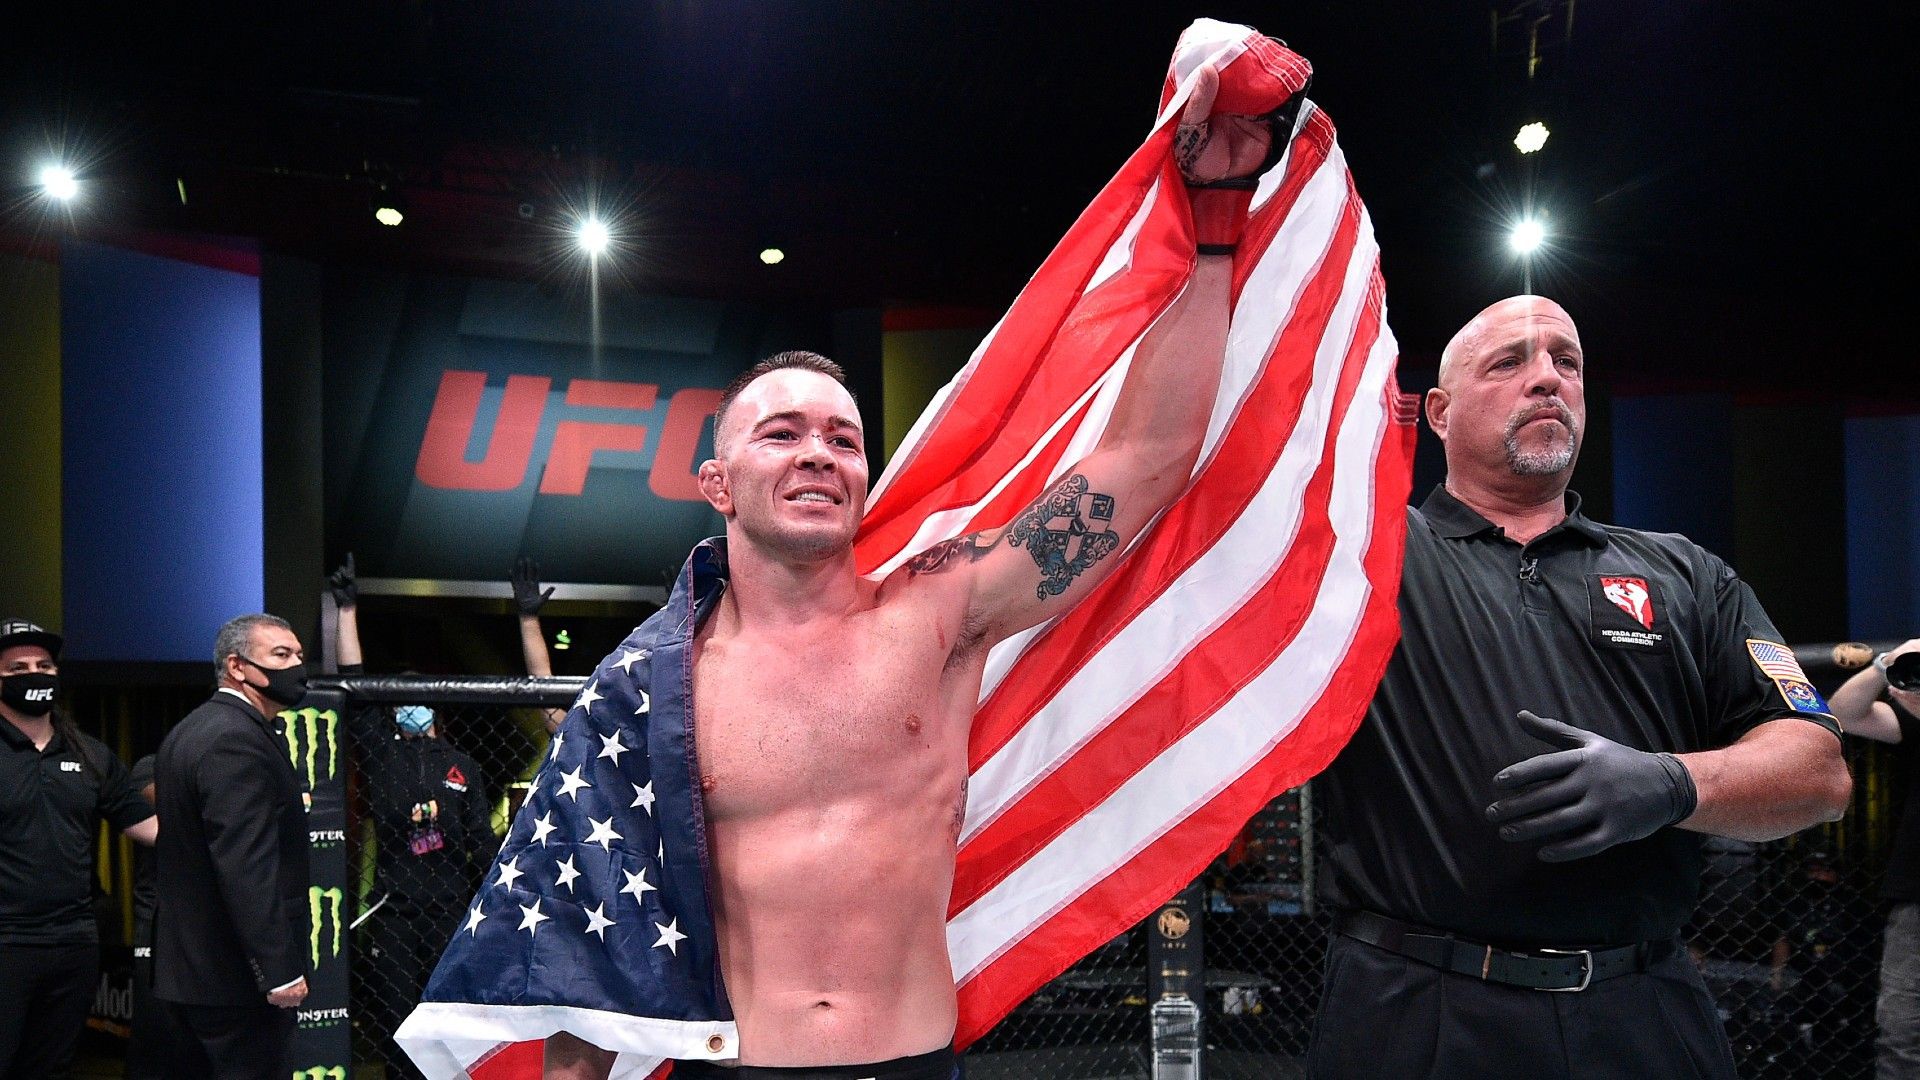 EXCLUSIVE: Colby Covington says it's not a rivalry with Kamaru Usman, it's real hatred